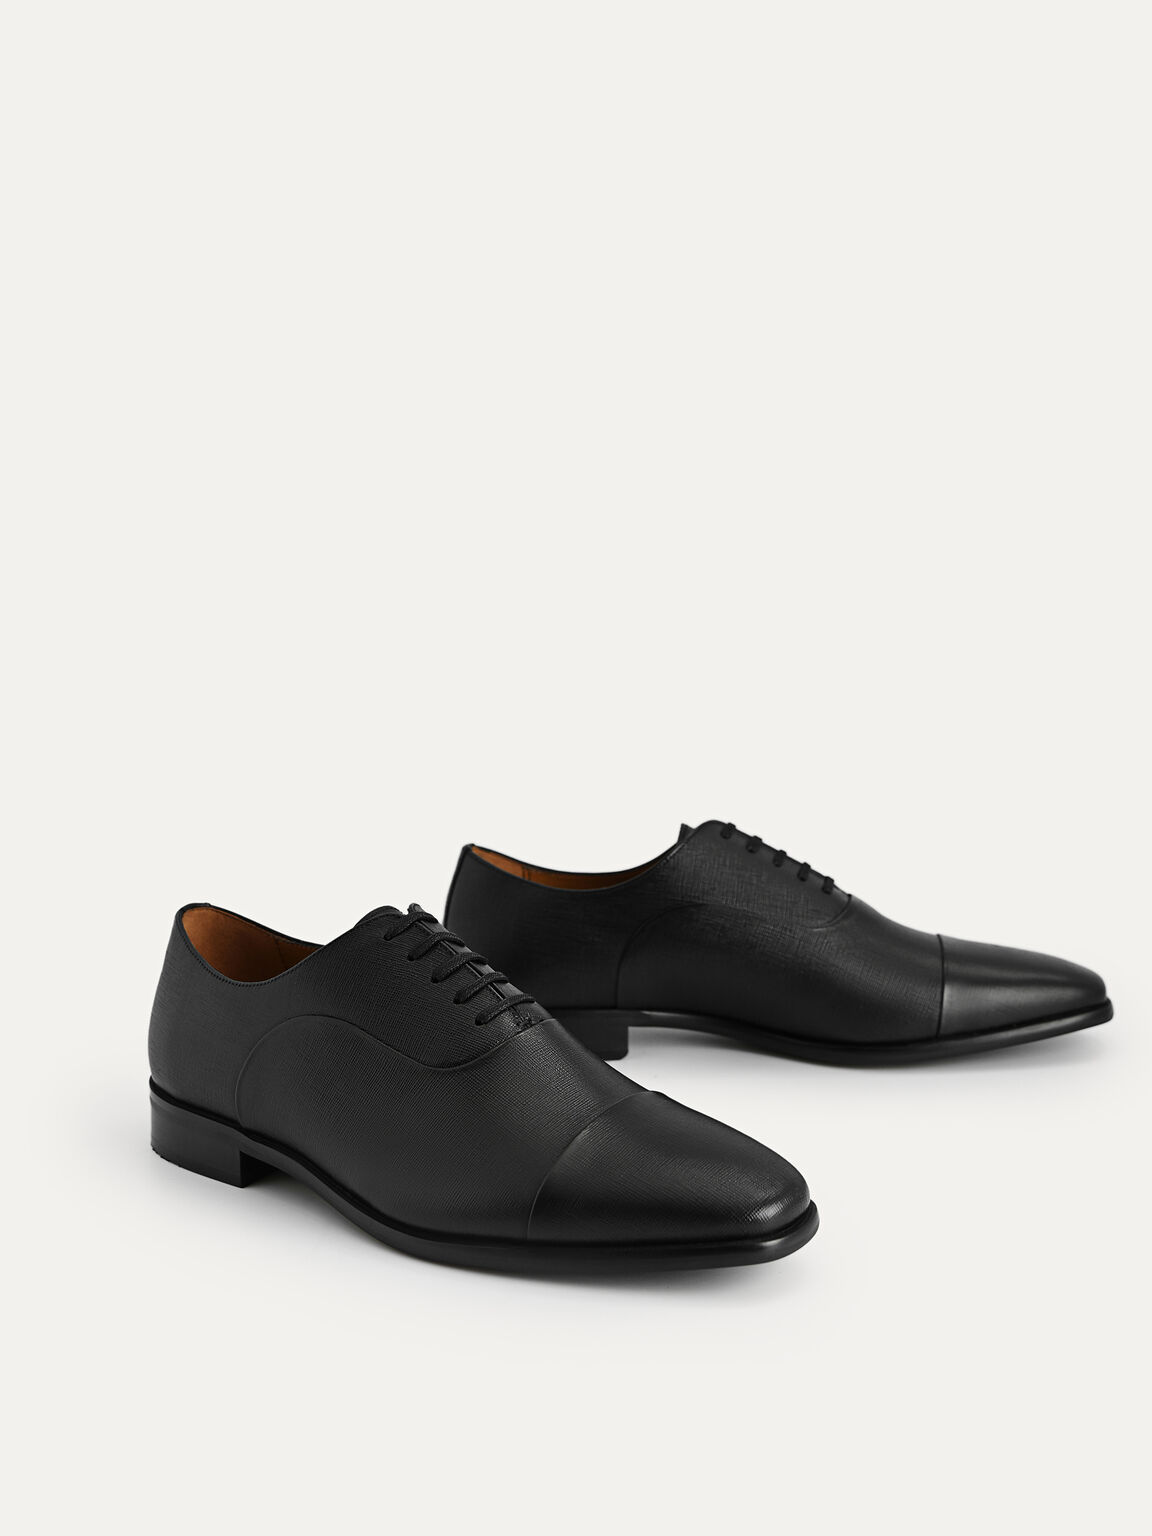 Textured Leather Oxford Shoes, Black